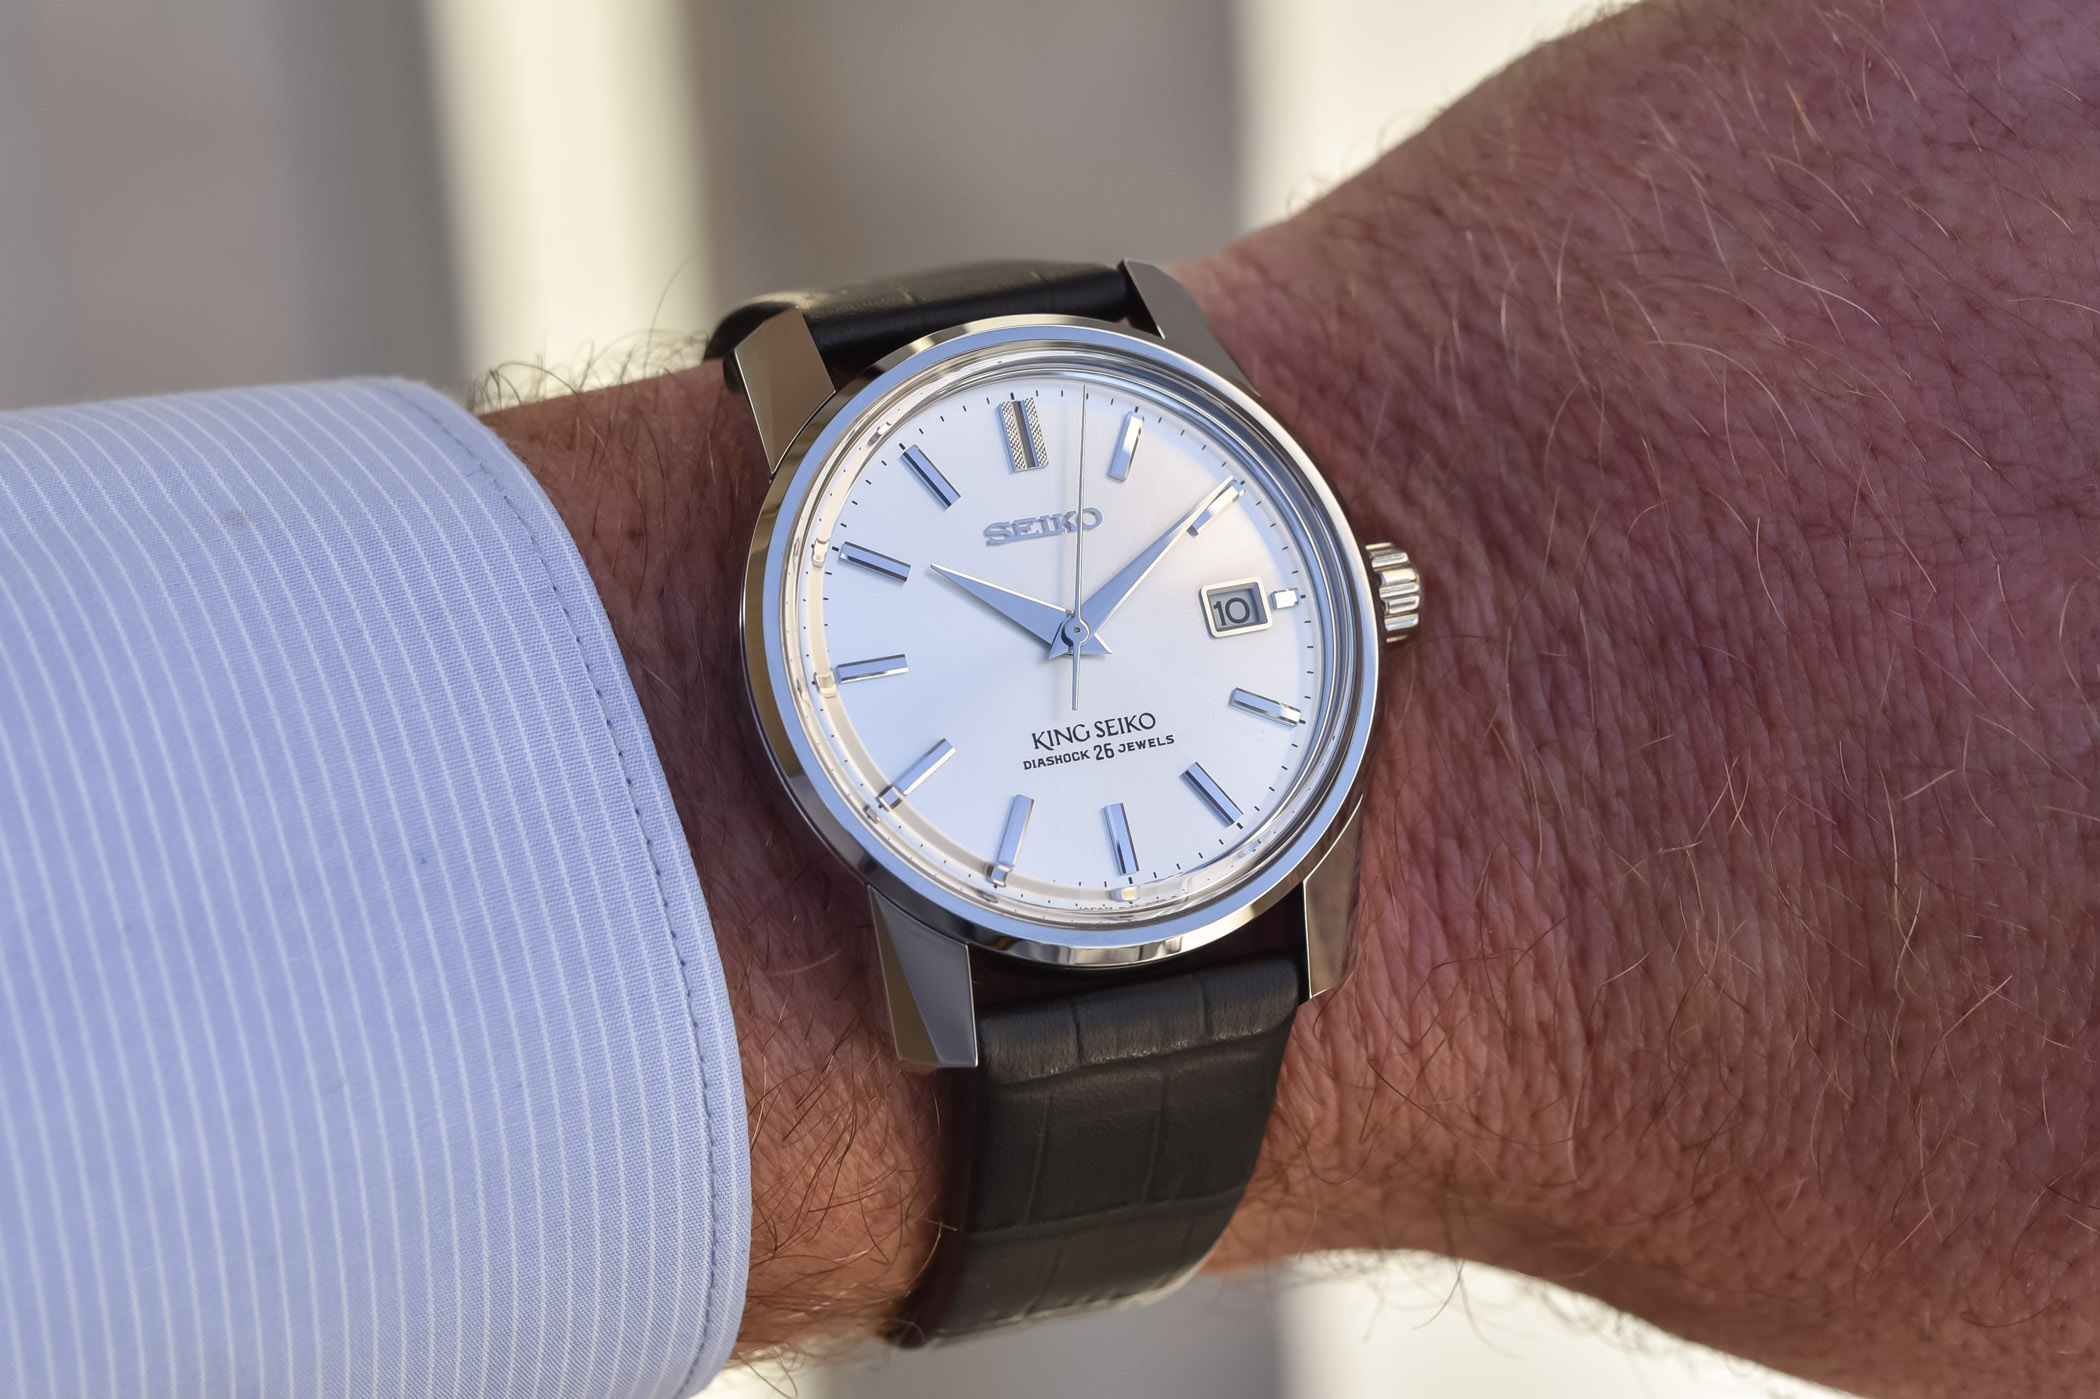 Why I Think The Return of King Seiko Misses The Mark - Monochrome Watches